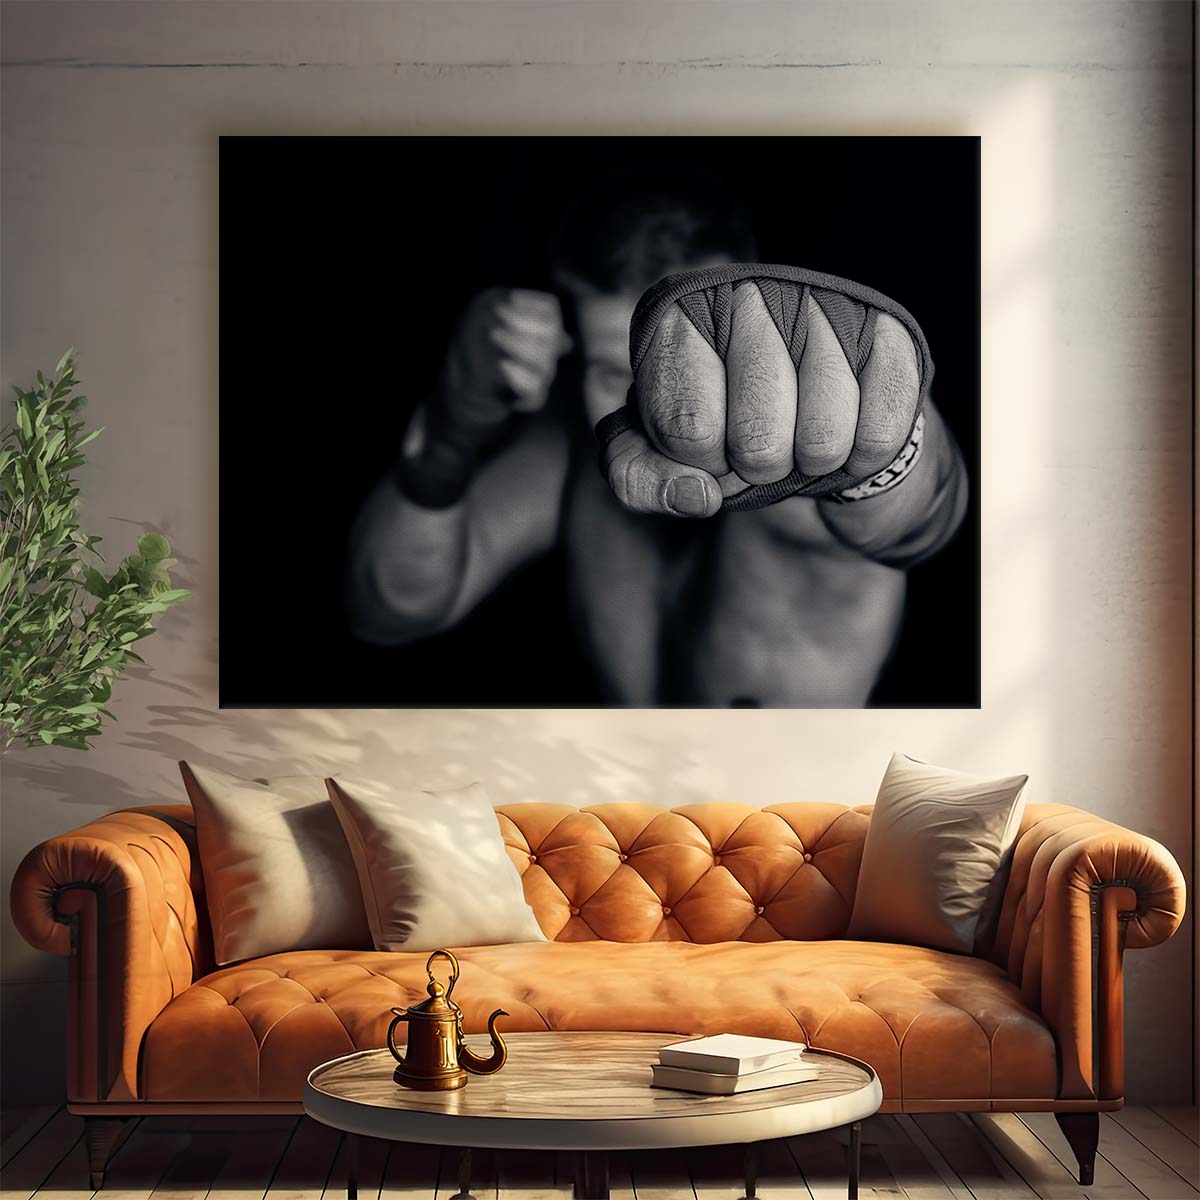 Monochrome Boxing Action Punch Portrait Wall Art by Luxuriance Designs. Made in USA.